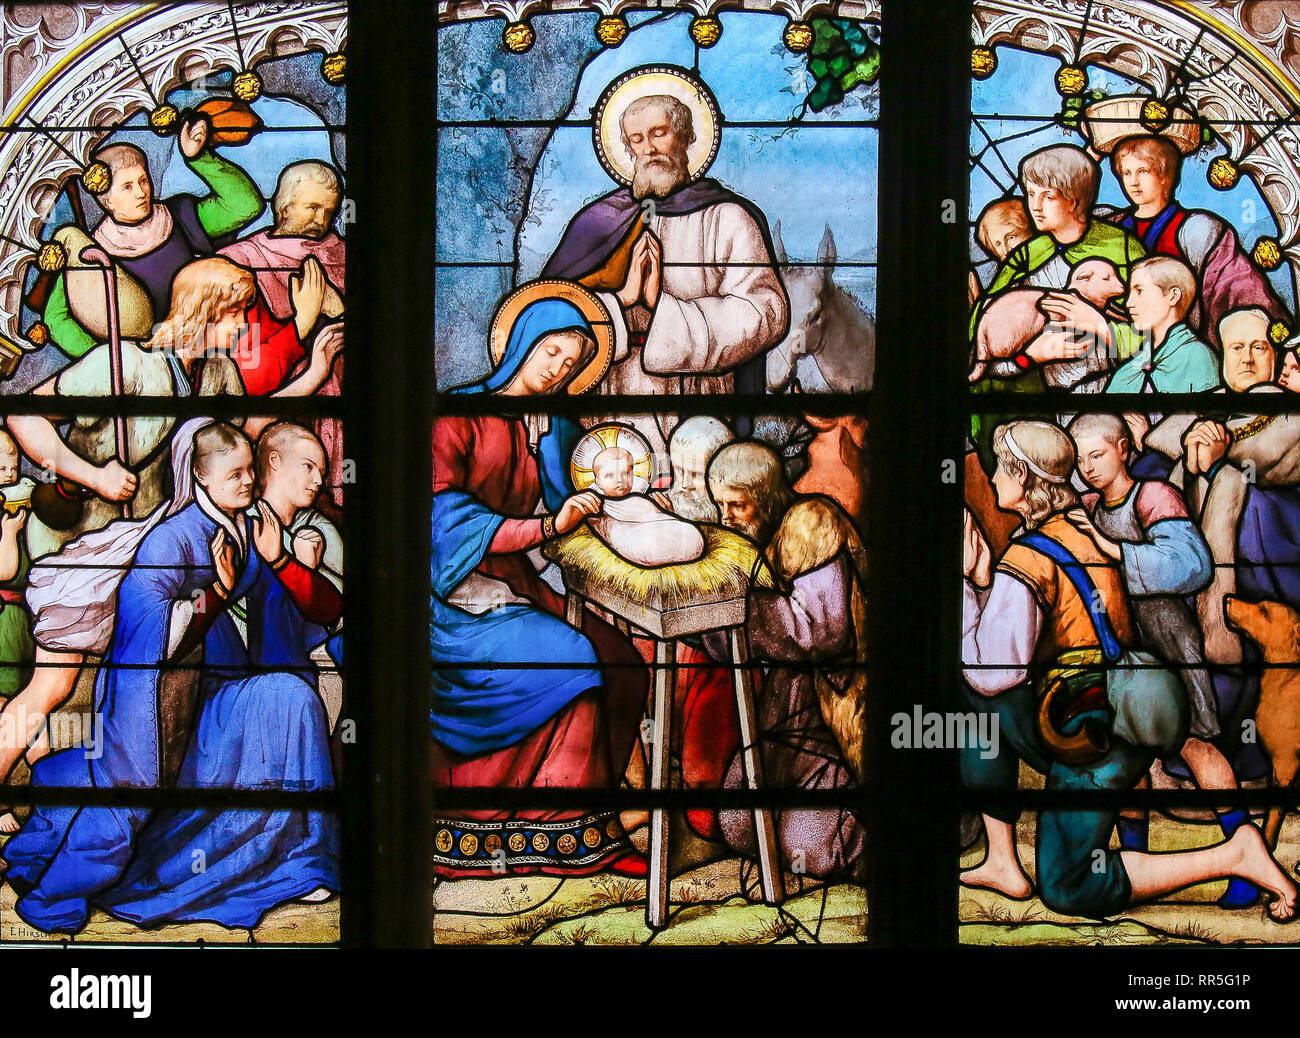 Stained Glass in the Church of Saint Severin, Latin Quarter, Paris, France, depicting a Nativity Scene at Christmas Stock Photo